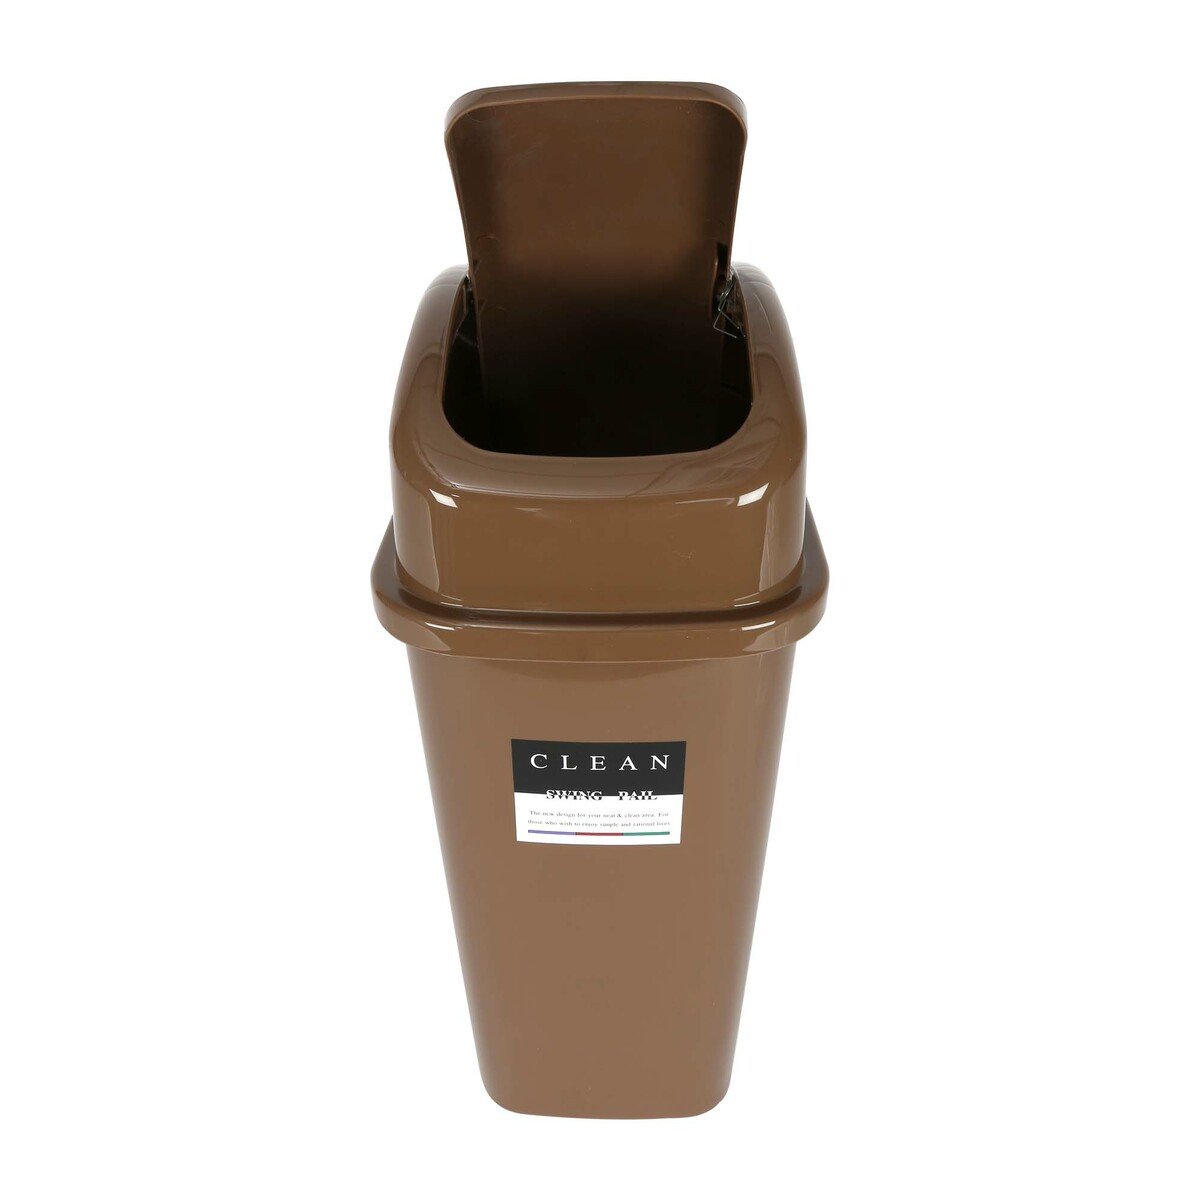 Soon Thorn Rectangle Swing Bin 15Ltr 665 Assorted Colors